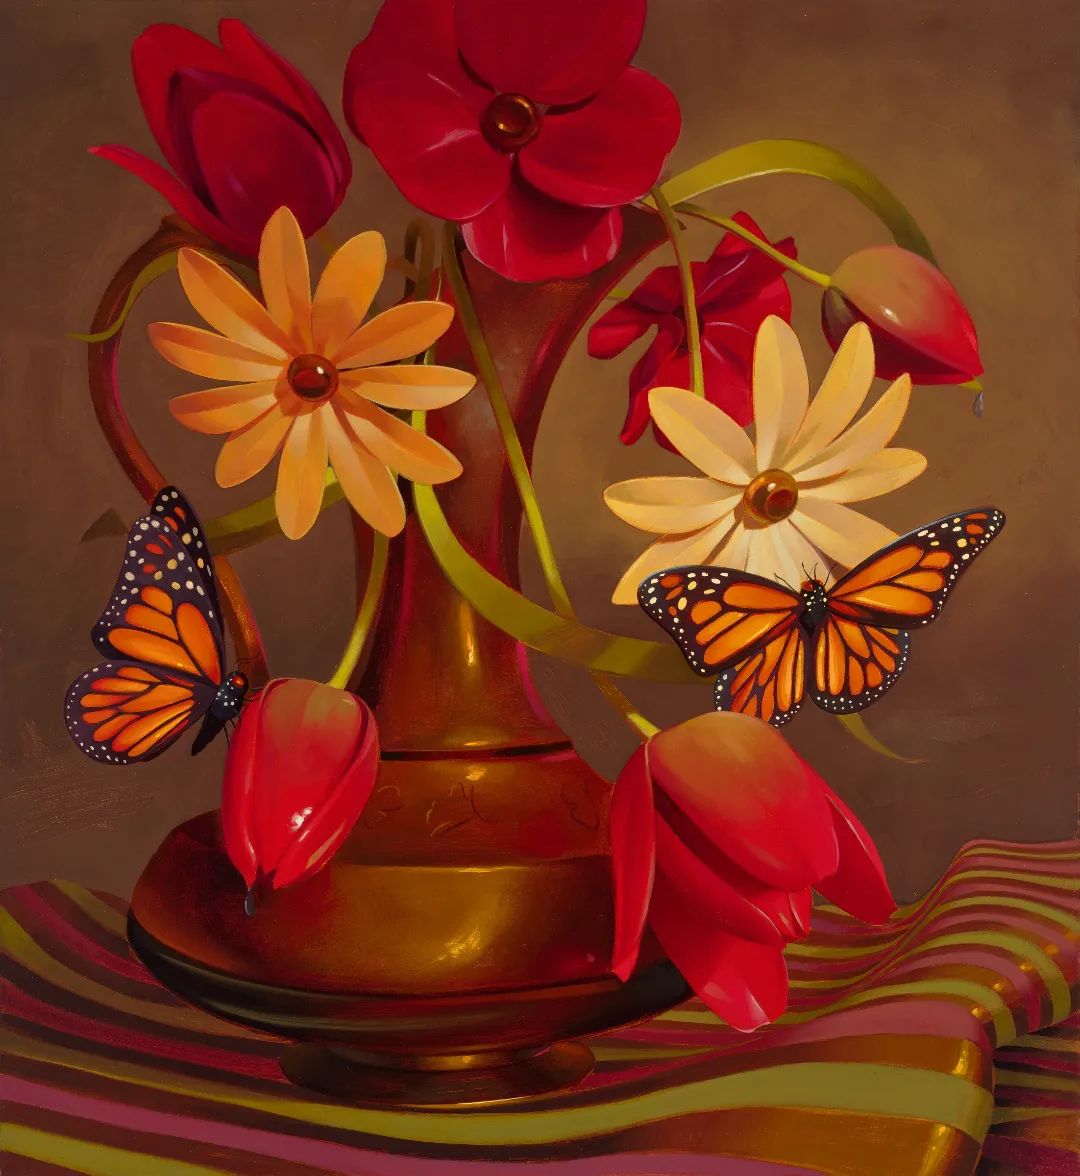 The Unique And Vibrant Still Life And Nature Paintings Of Canadian Artist Megan Ellen (11)